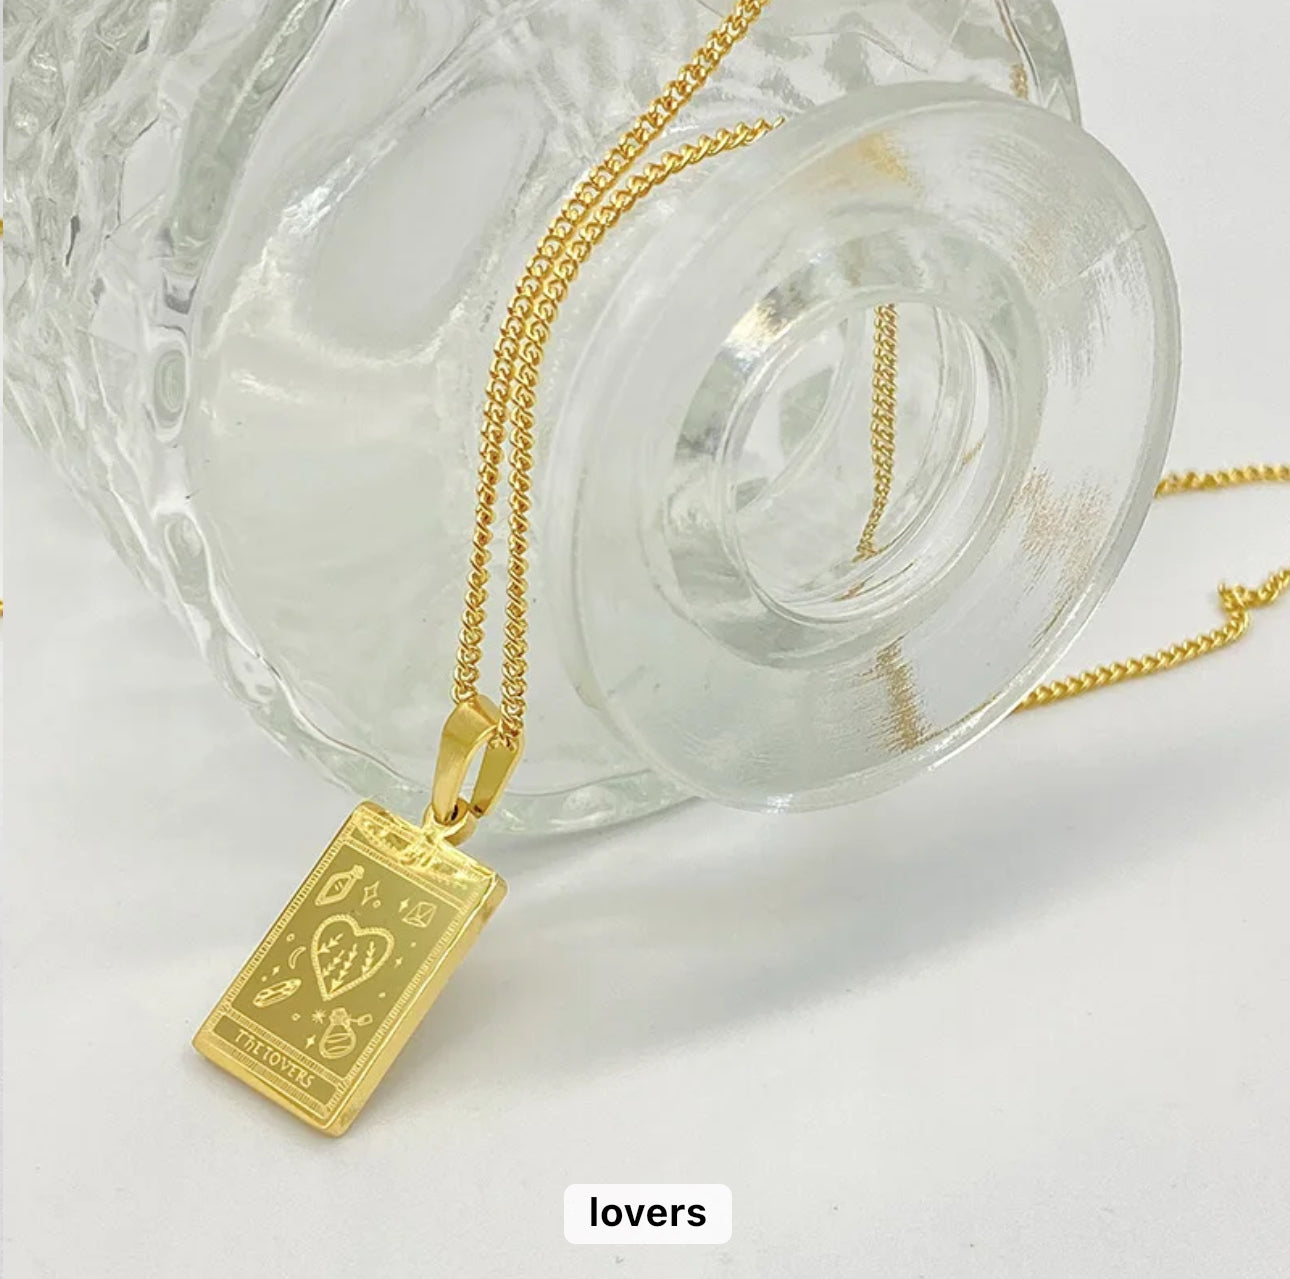 Engraved Tarot Card Necklace | 18K Gold Plated, 316L Stainless Steel